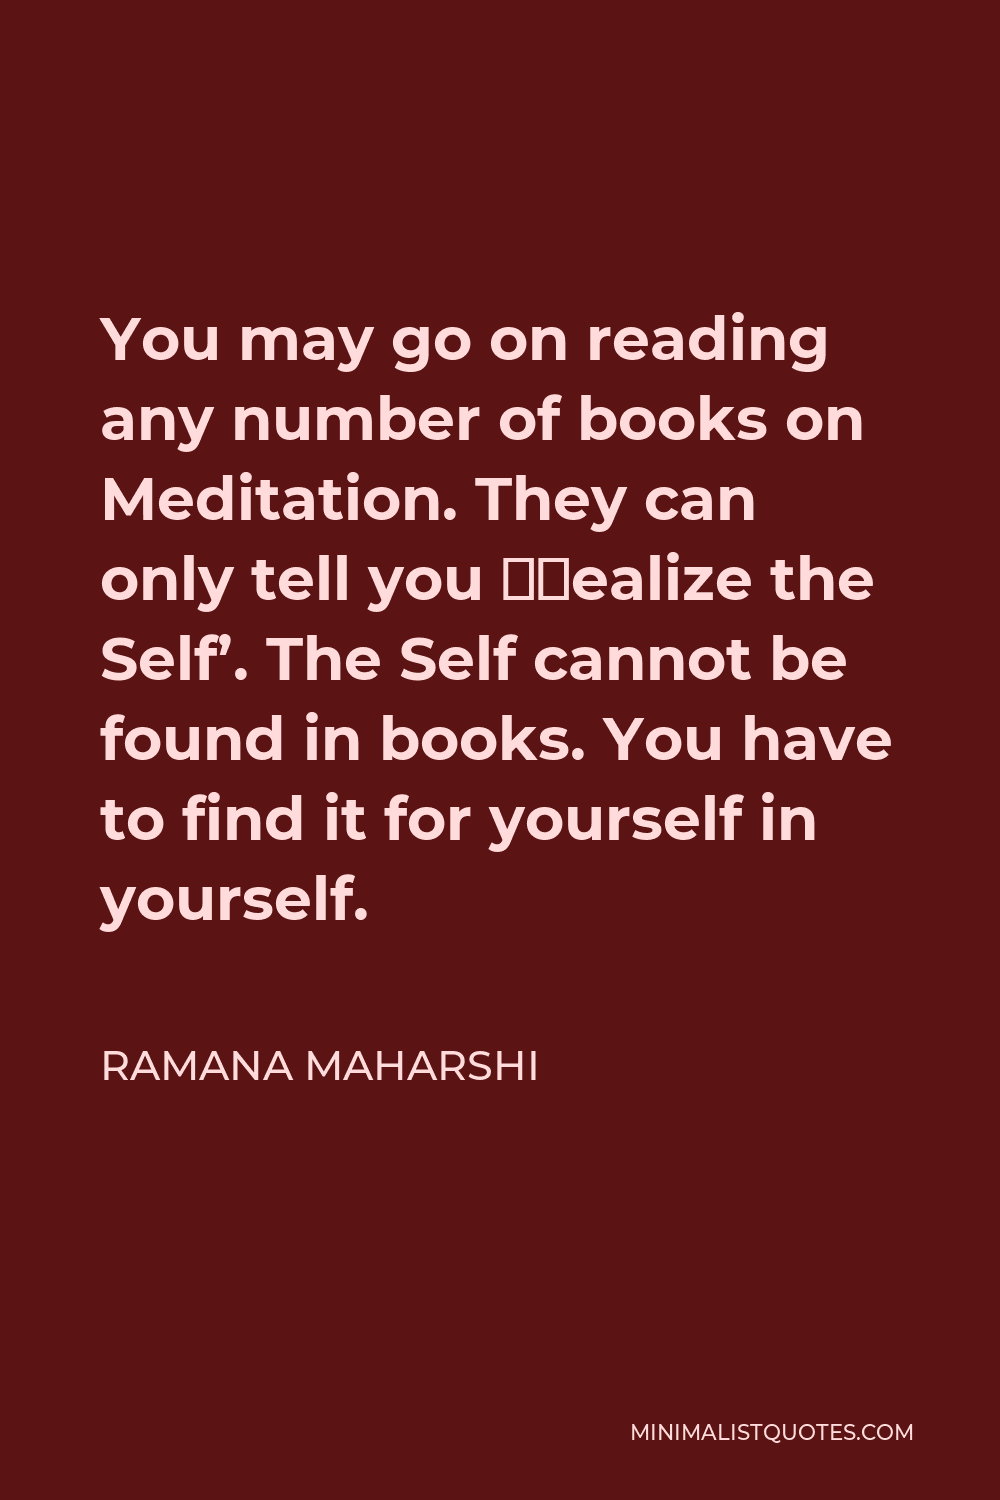 Ramana Maharshi Quote - You may go on reading any number of books on Meditation. They can only tell you ‘Realize the Self’. The Self cannot be found in books. You have to find it for yourself in yourself.